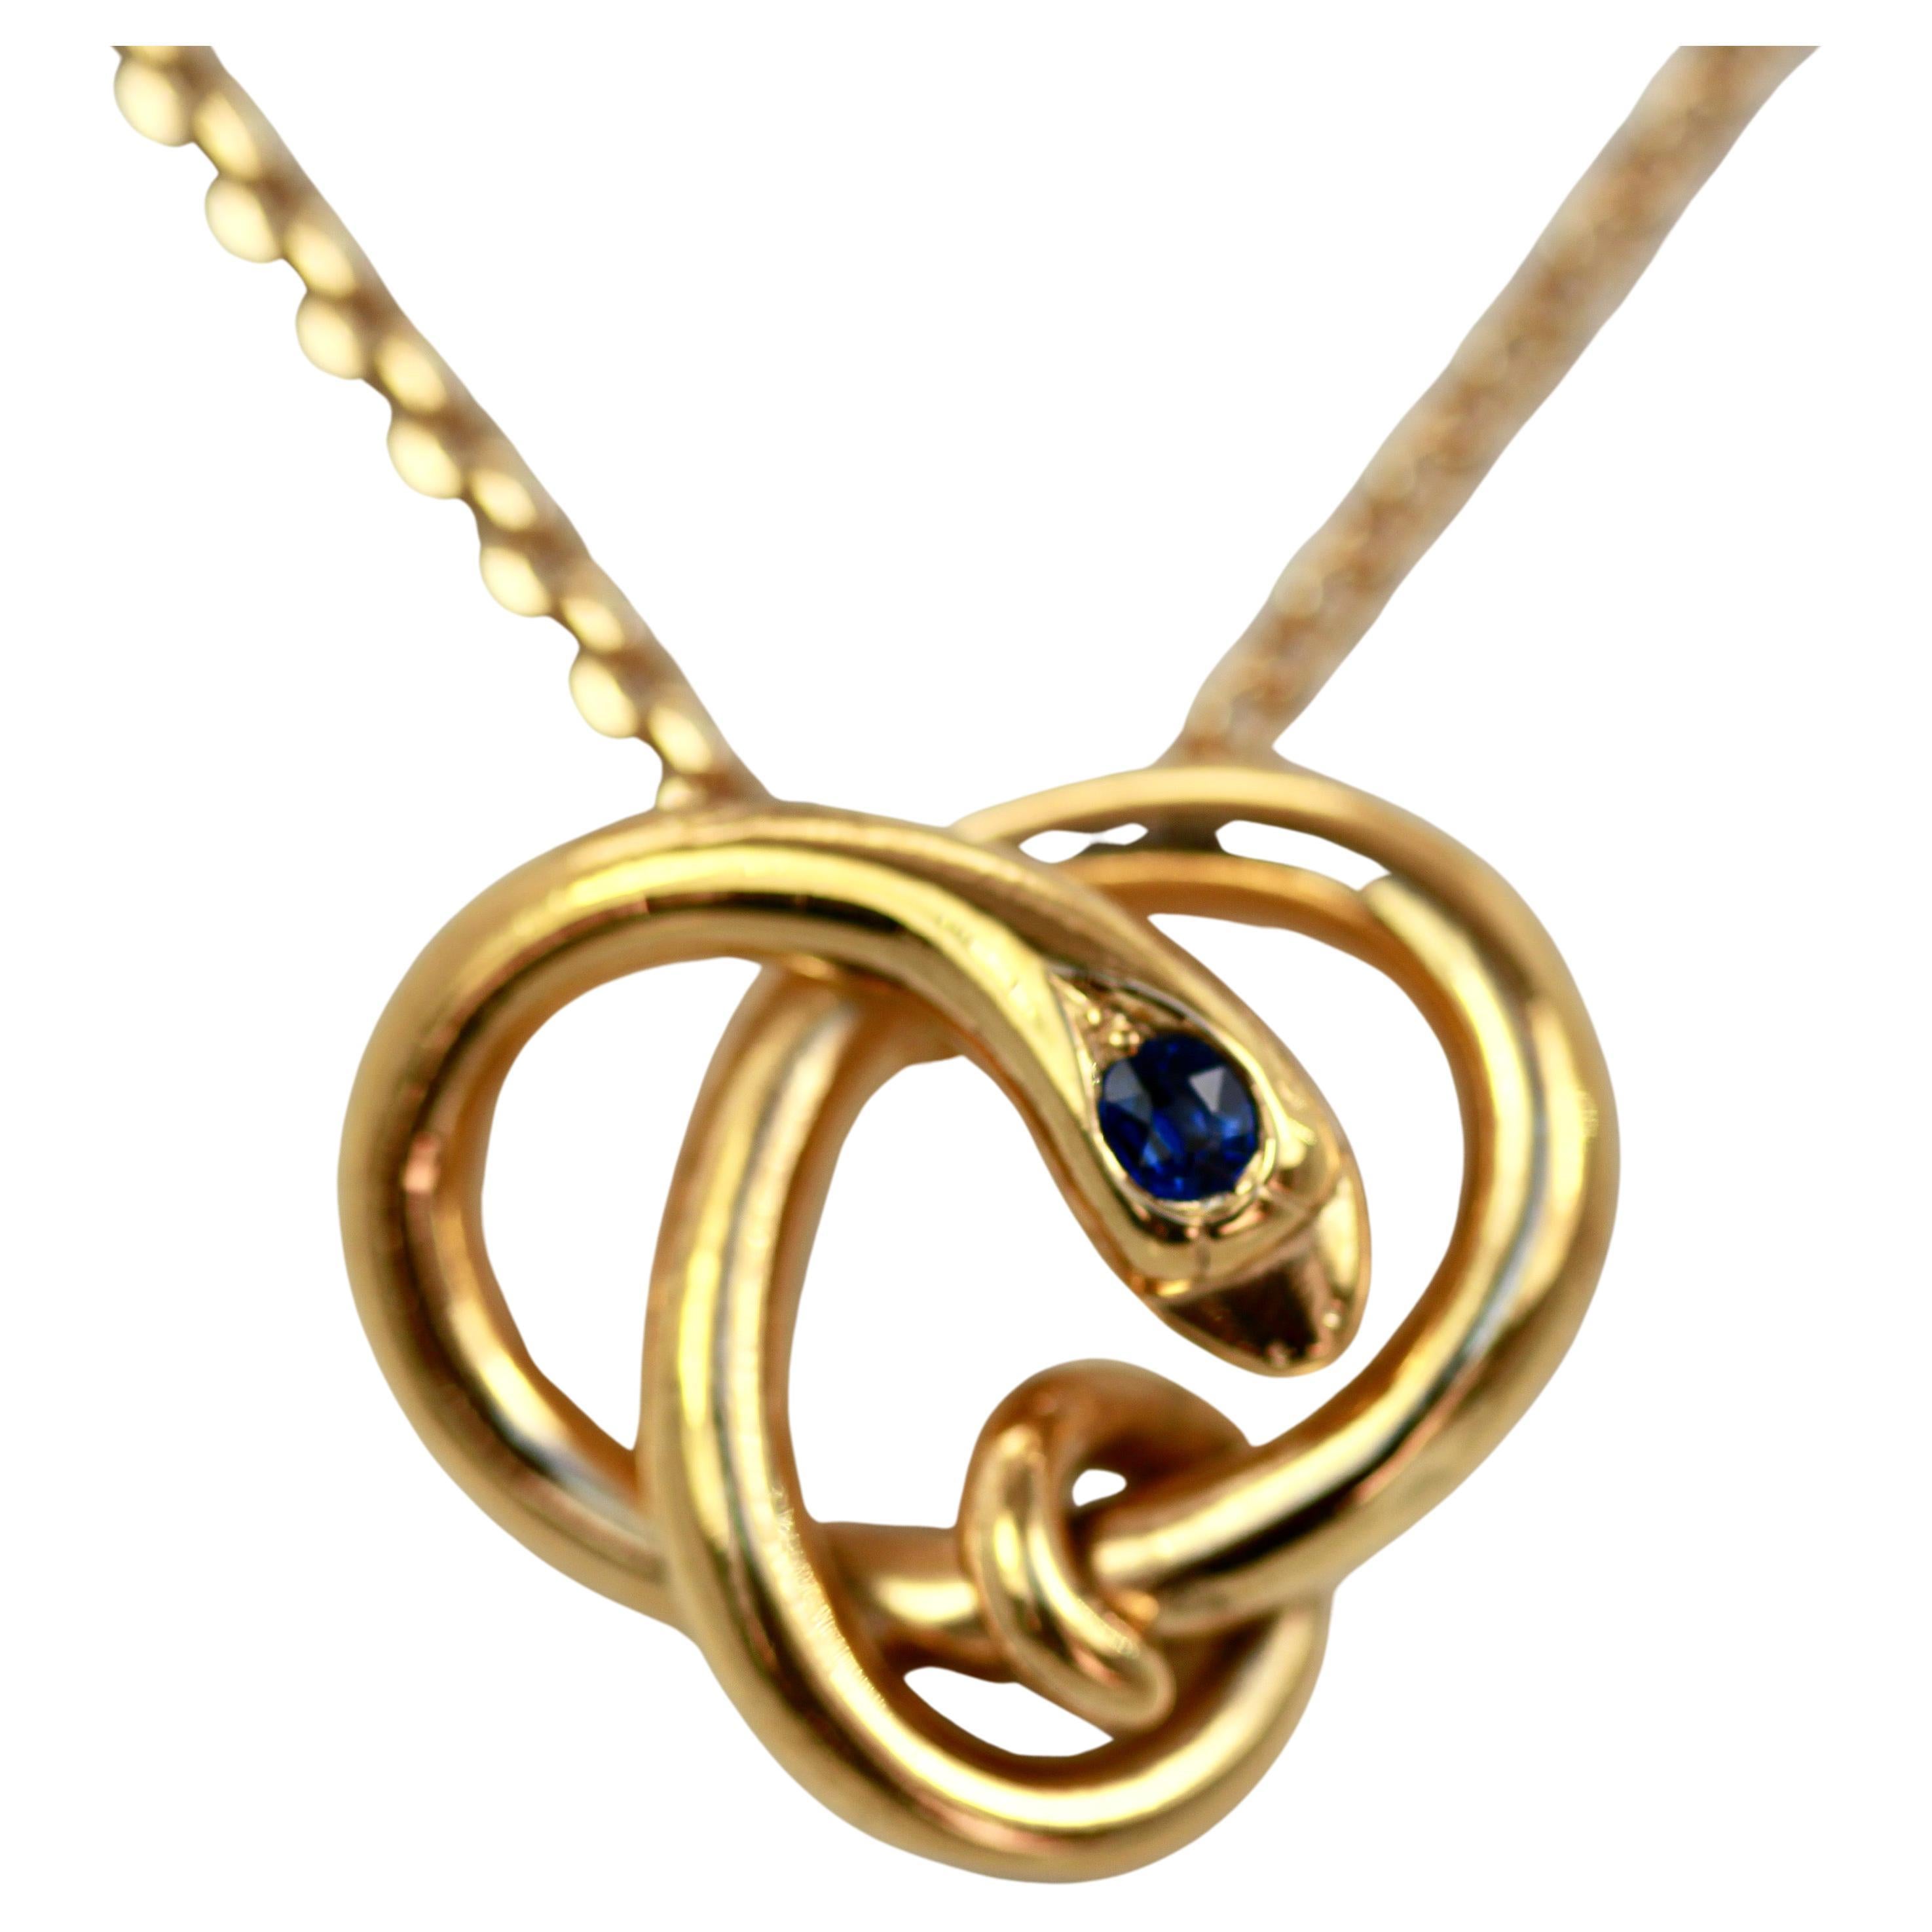 Vintage 14K Yellow Gold Snake W/ Sapphire Head Pendant / Necklace